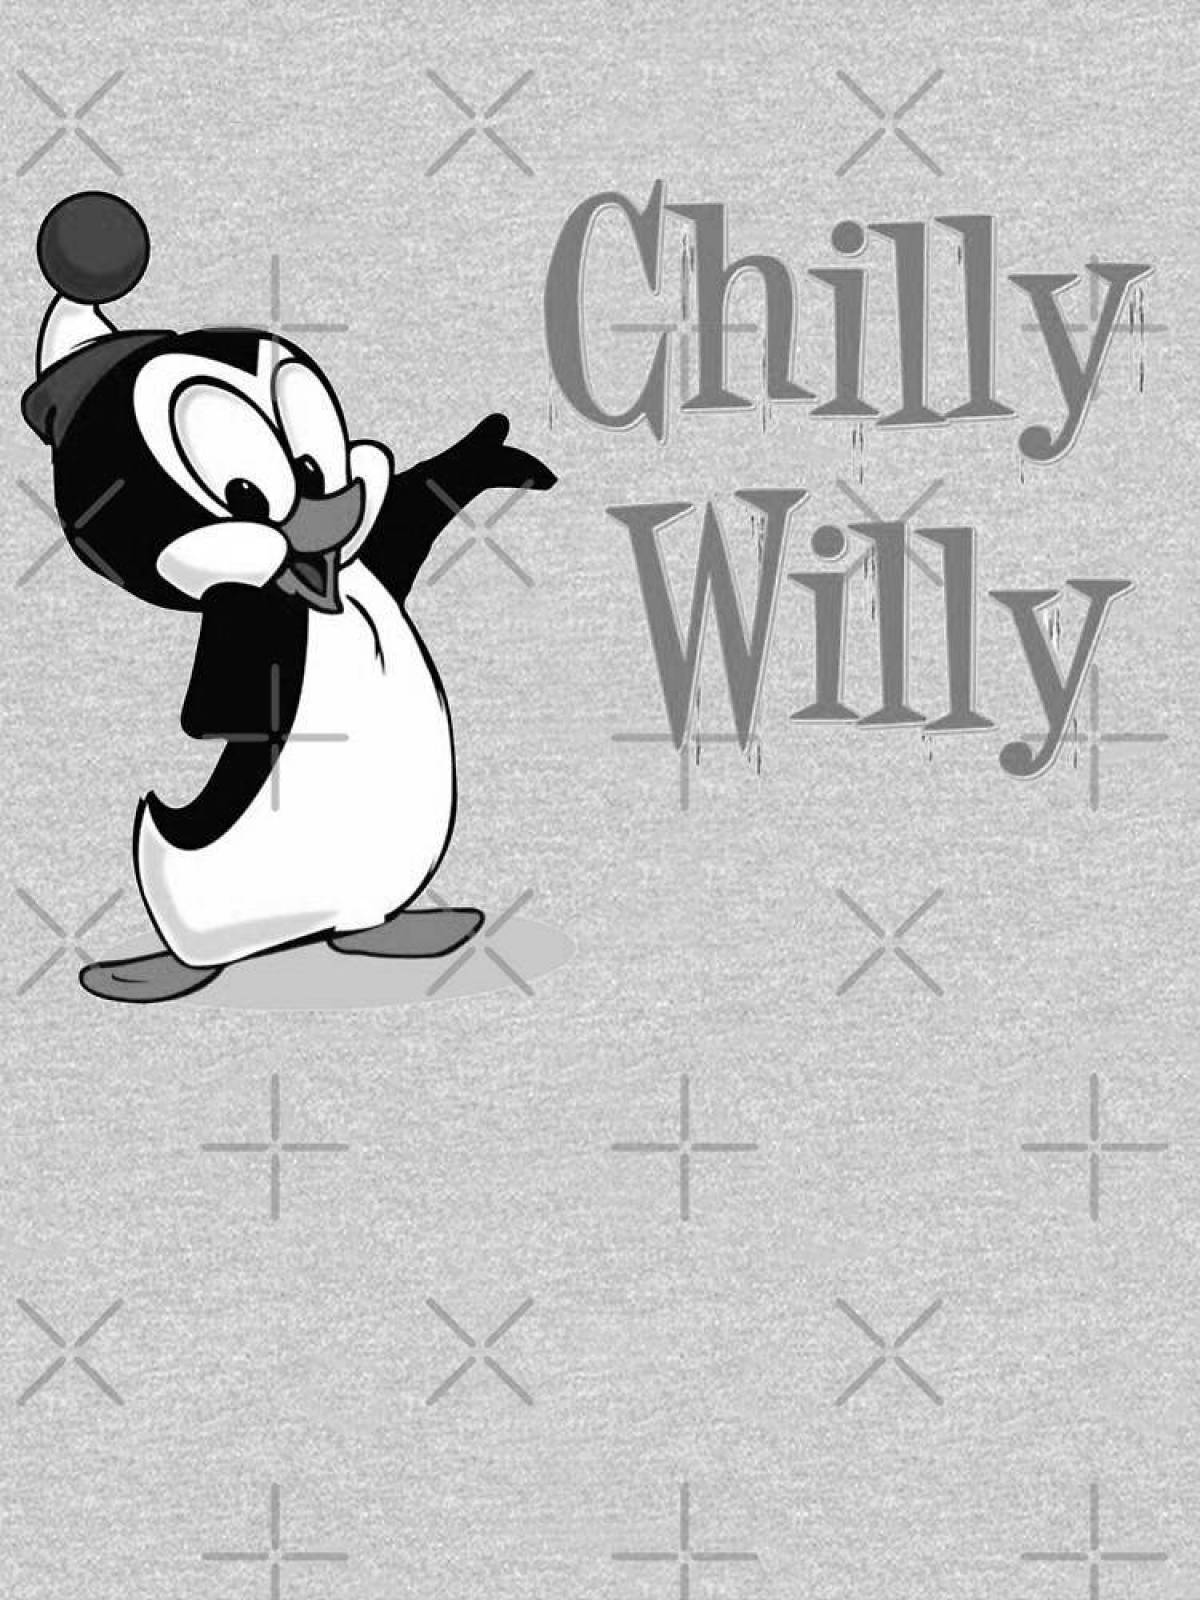 Chilly willy #6